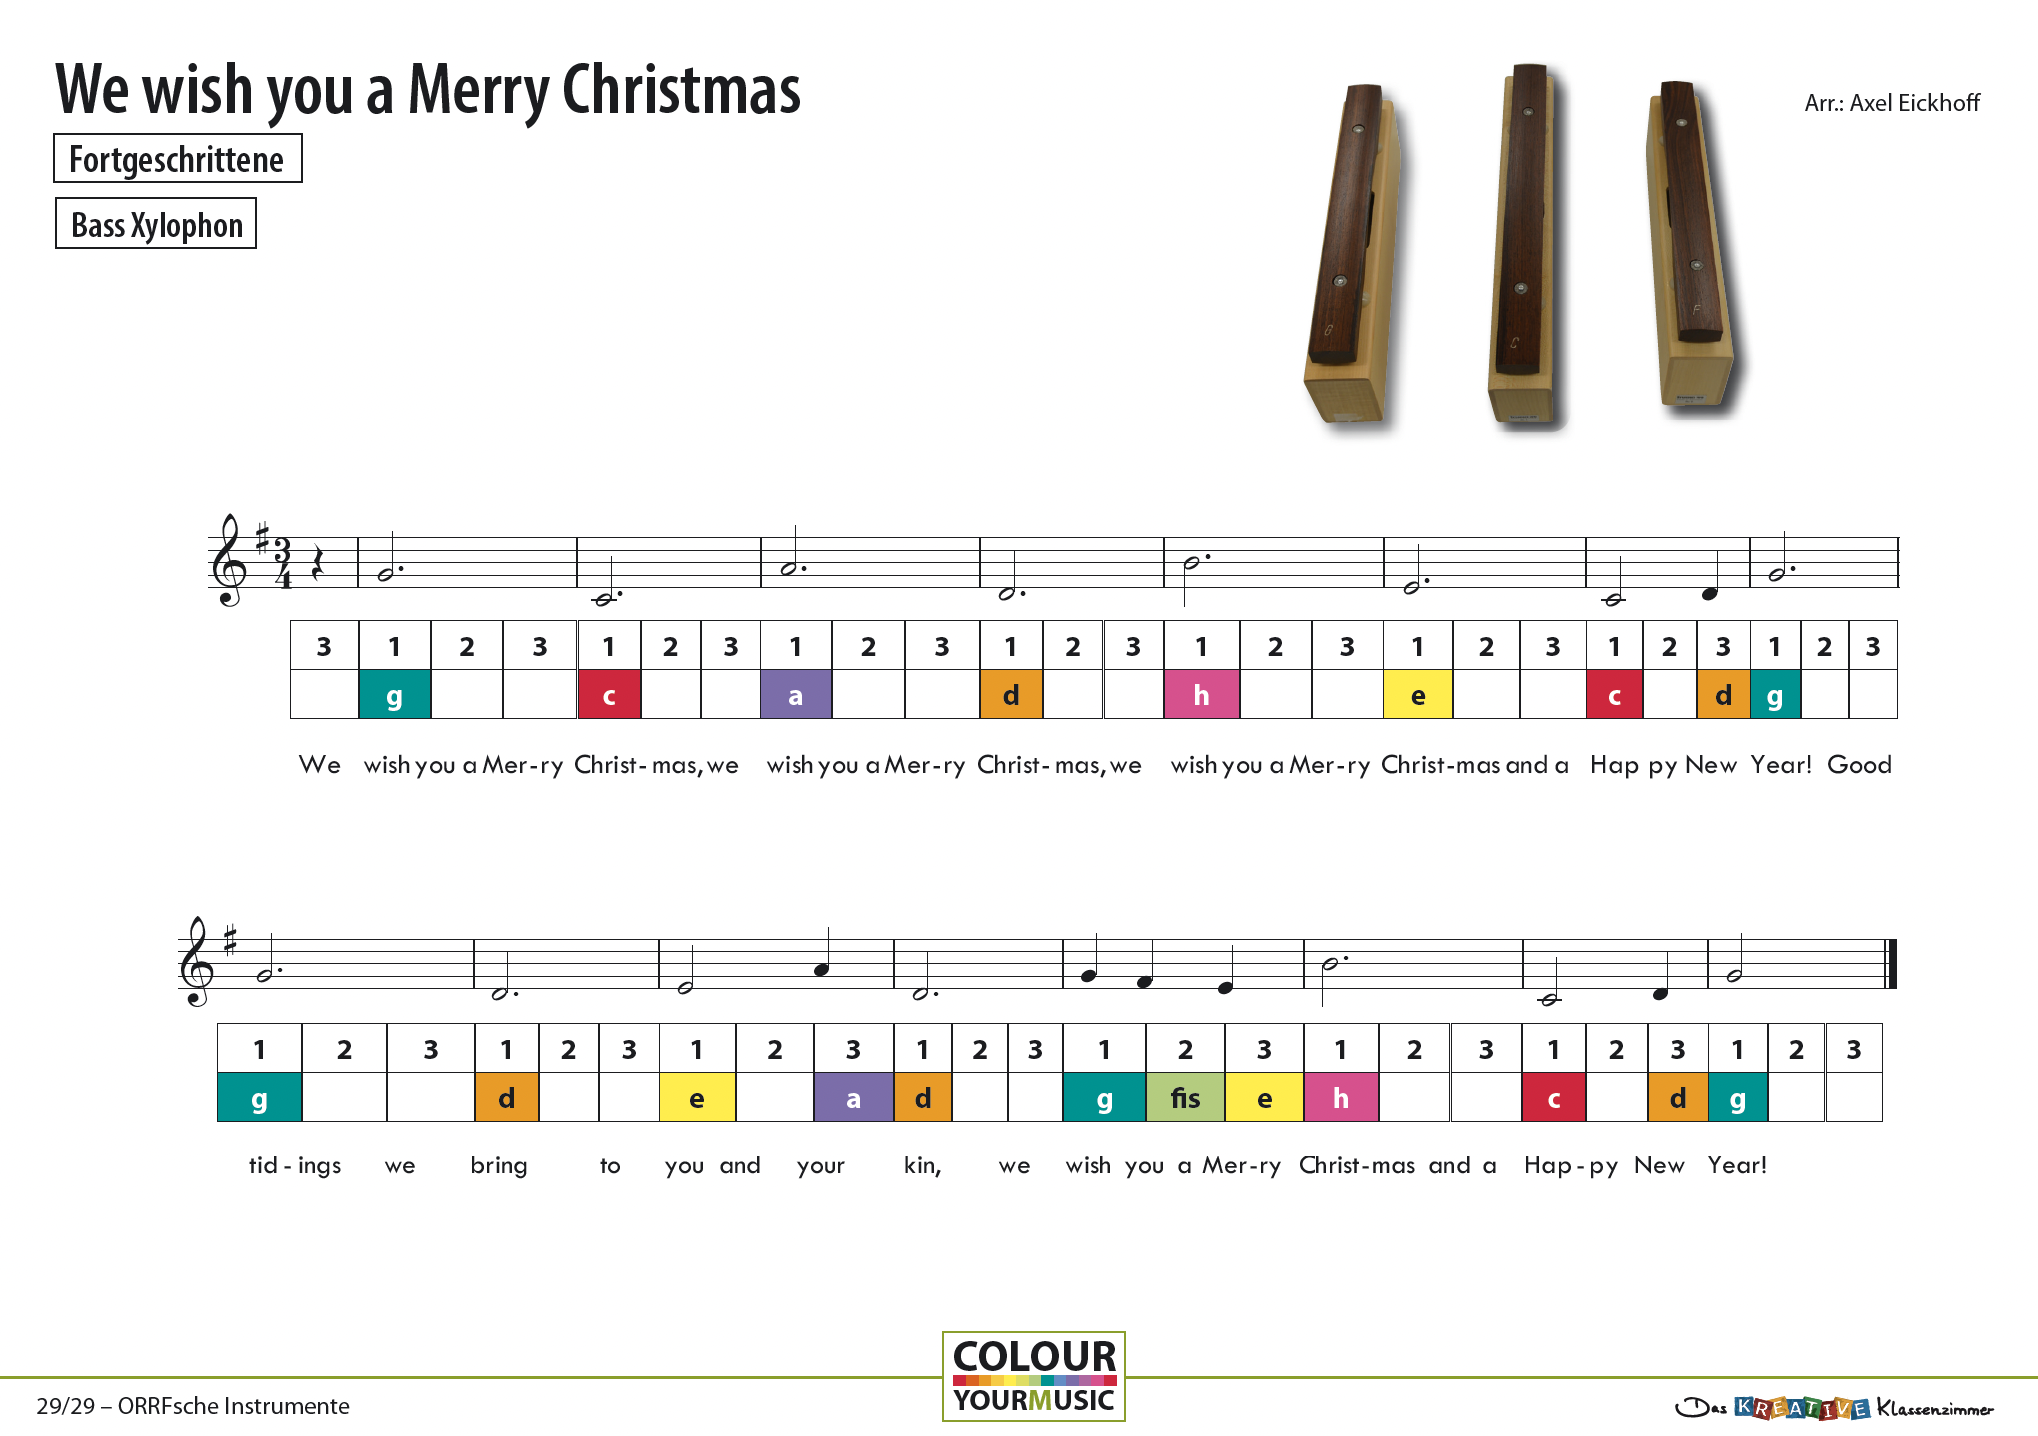 We wish you a Merry Christmas - Orff 